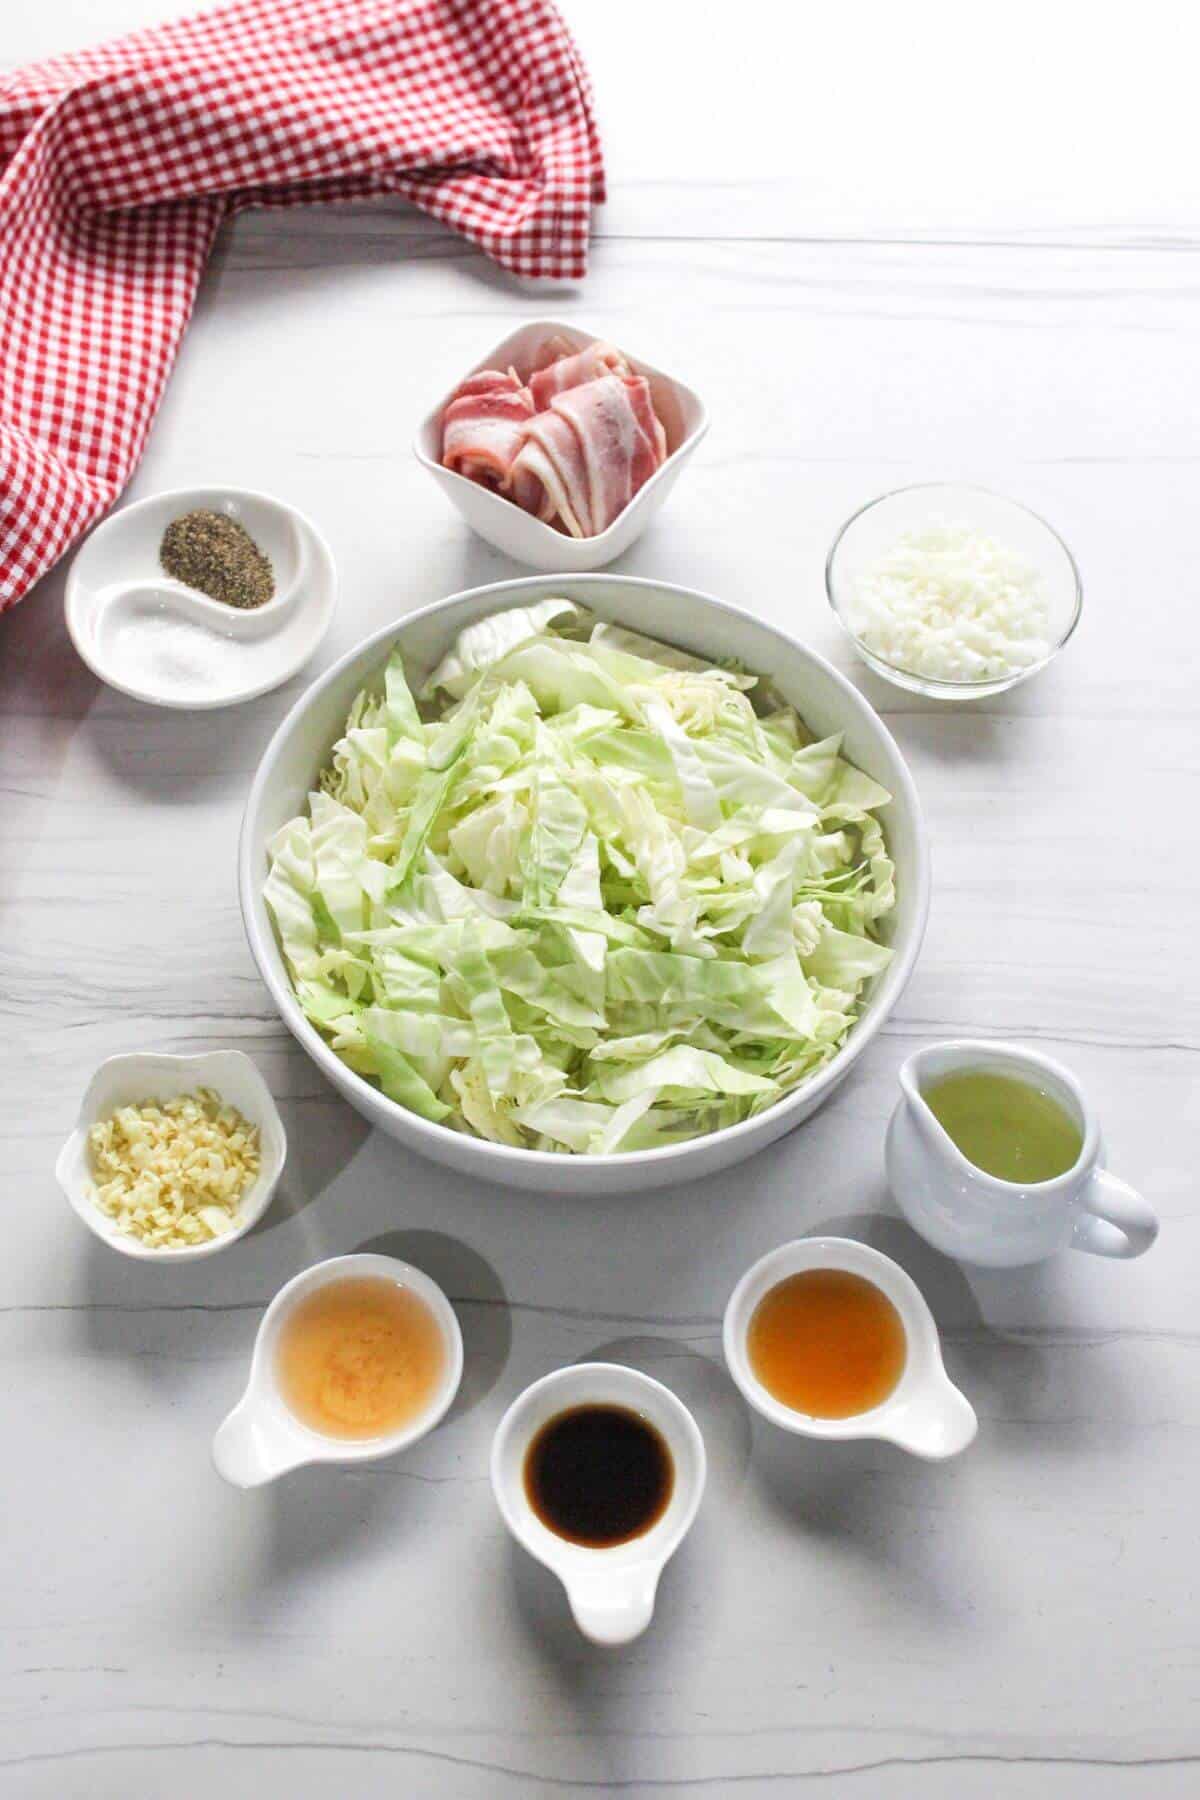 Ingredients for Southern fried cabbage recipe.